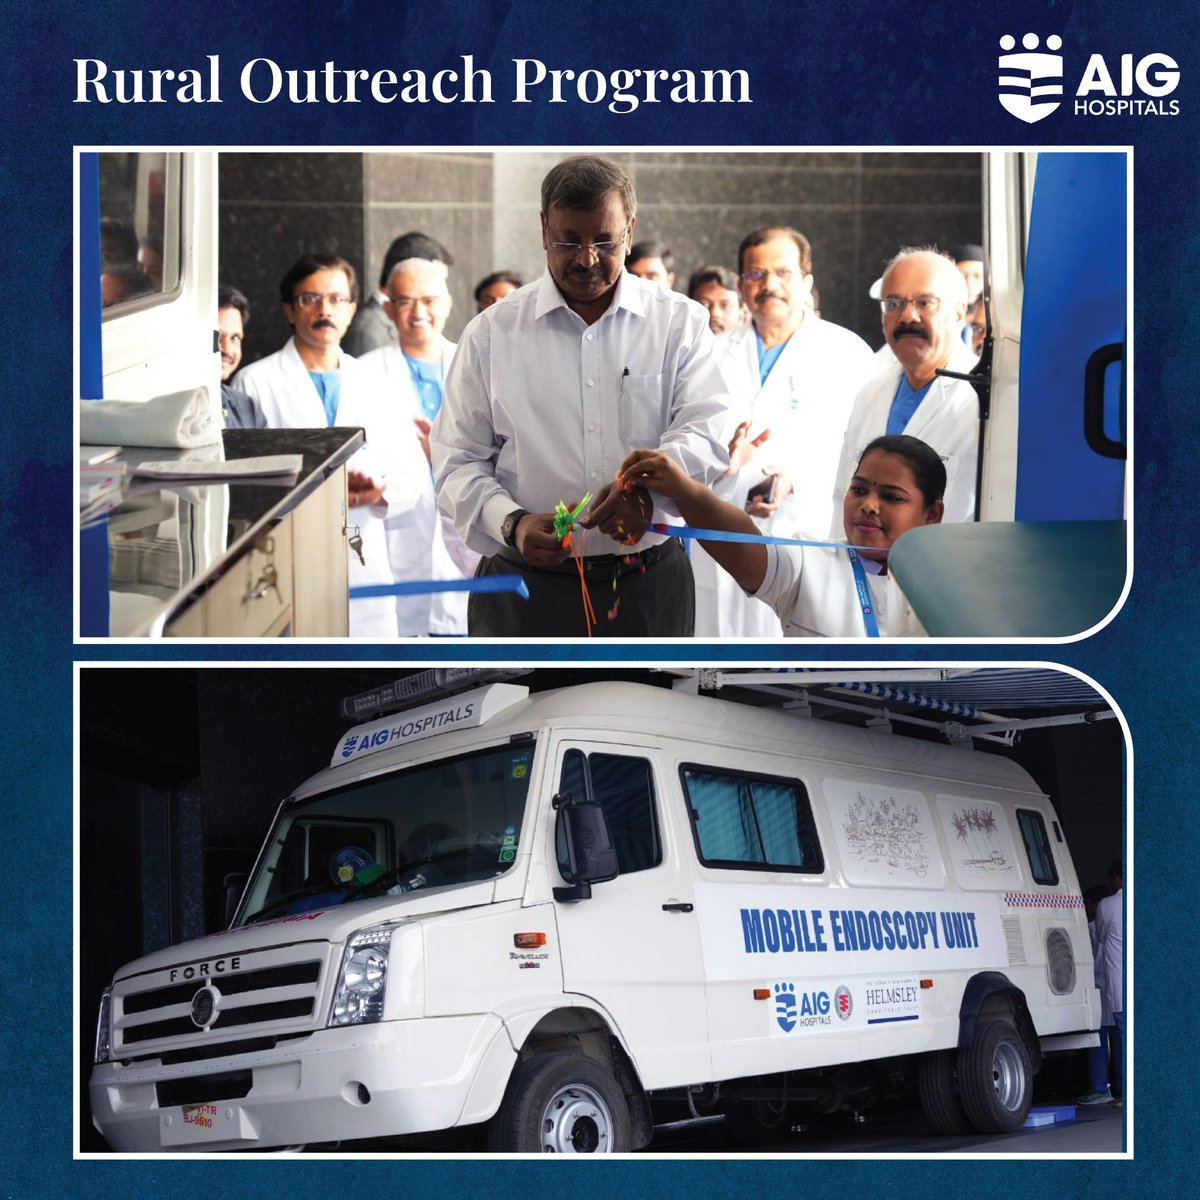 Towards the mission of providing equitable and accessible healthcare for all, AIG Hospitals added an additional Mobile Endoscopy Unit under the AIG Rural Outreach Program to enhance GI disease screening and treatment across rural areas. We are thankful to noted entrepreneur Shri.